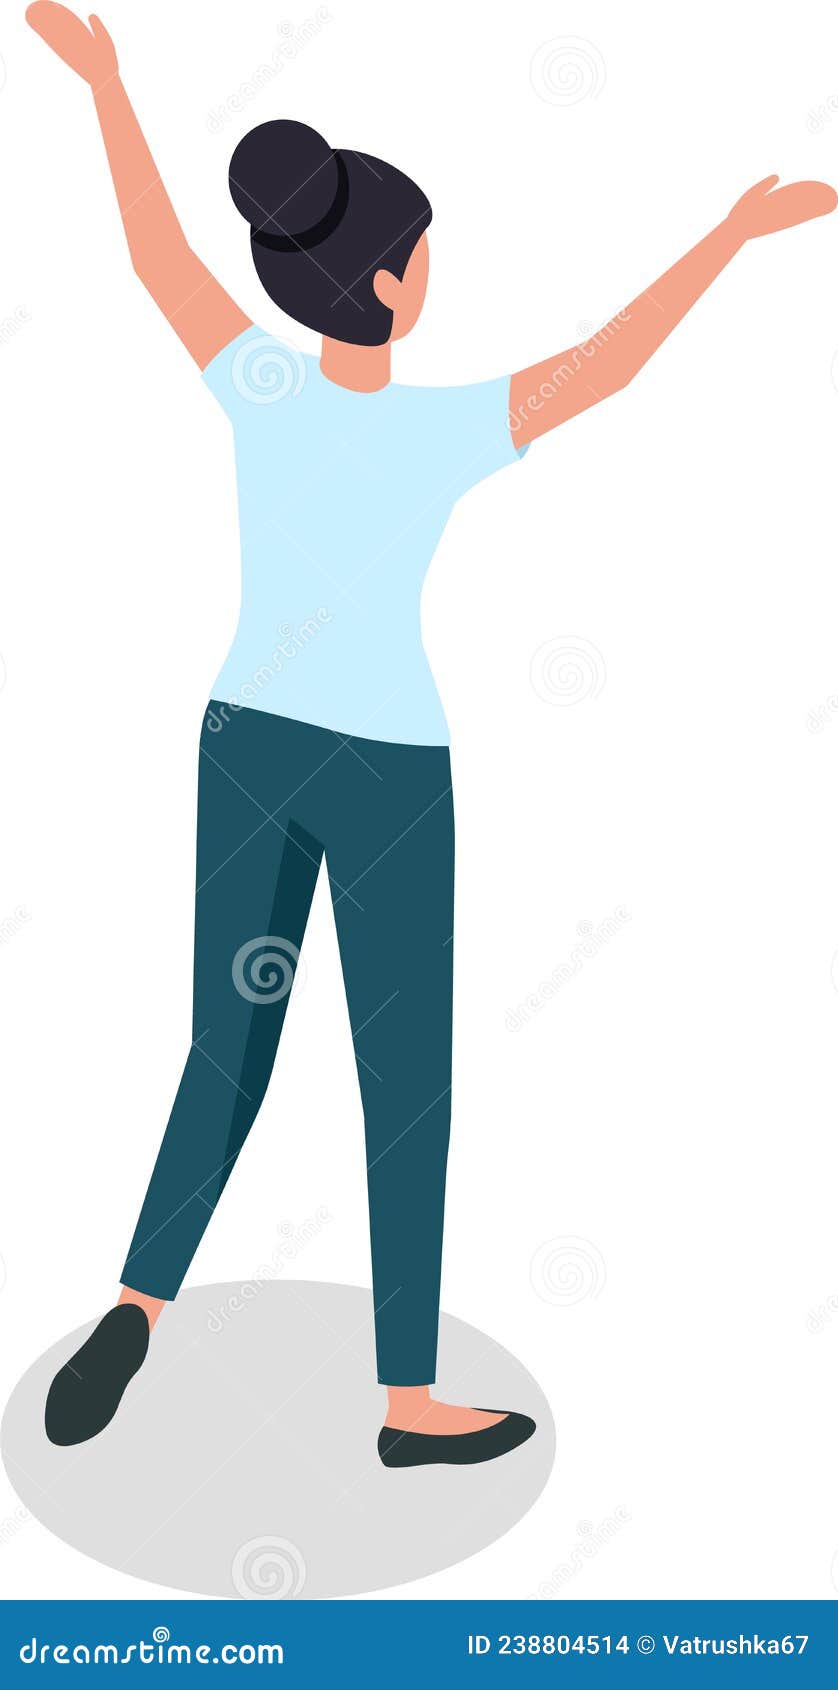 Woman hand showing picking up pose or holding... - Stock Photo [48424802] -  PIXTA